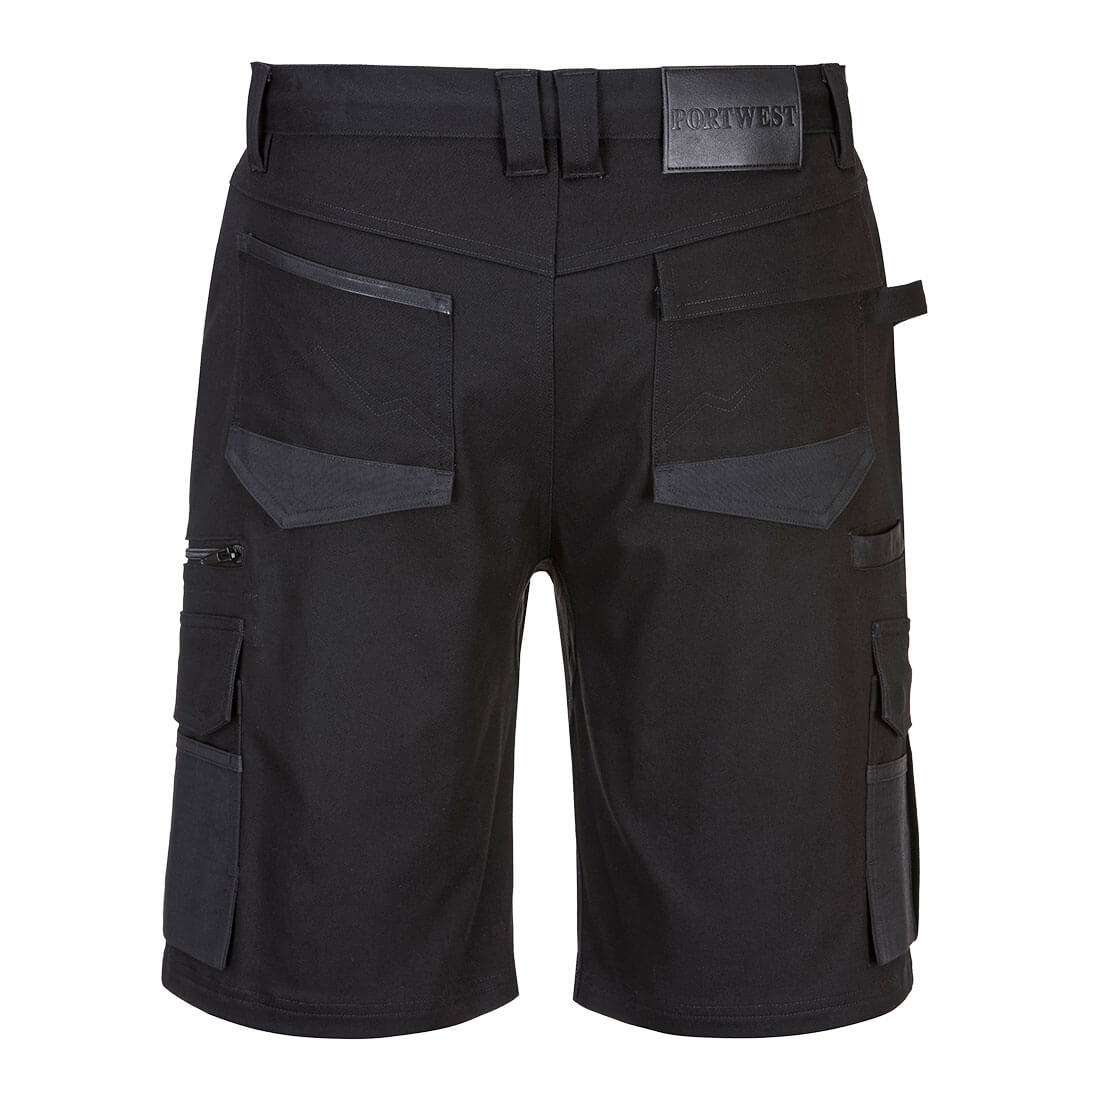 Slim Fit Stretch Shorts Black front- MP706